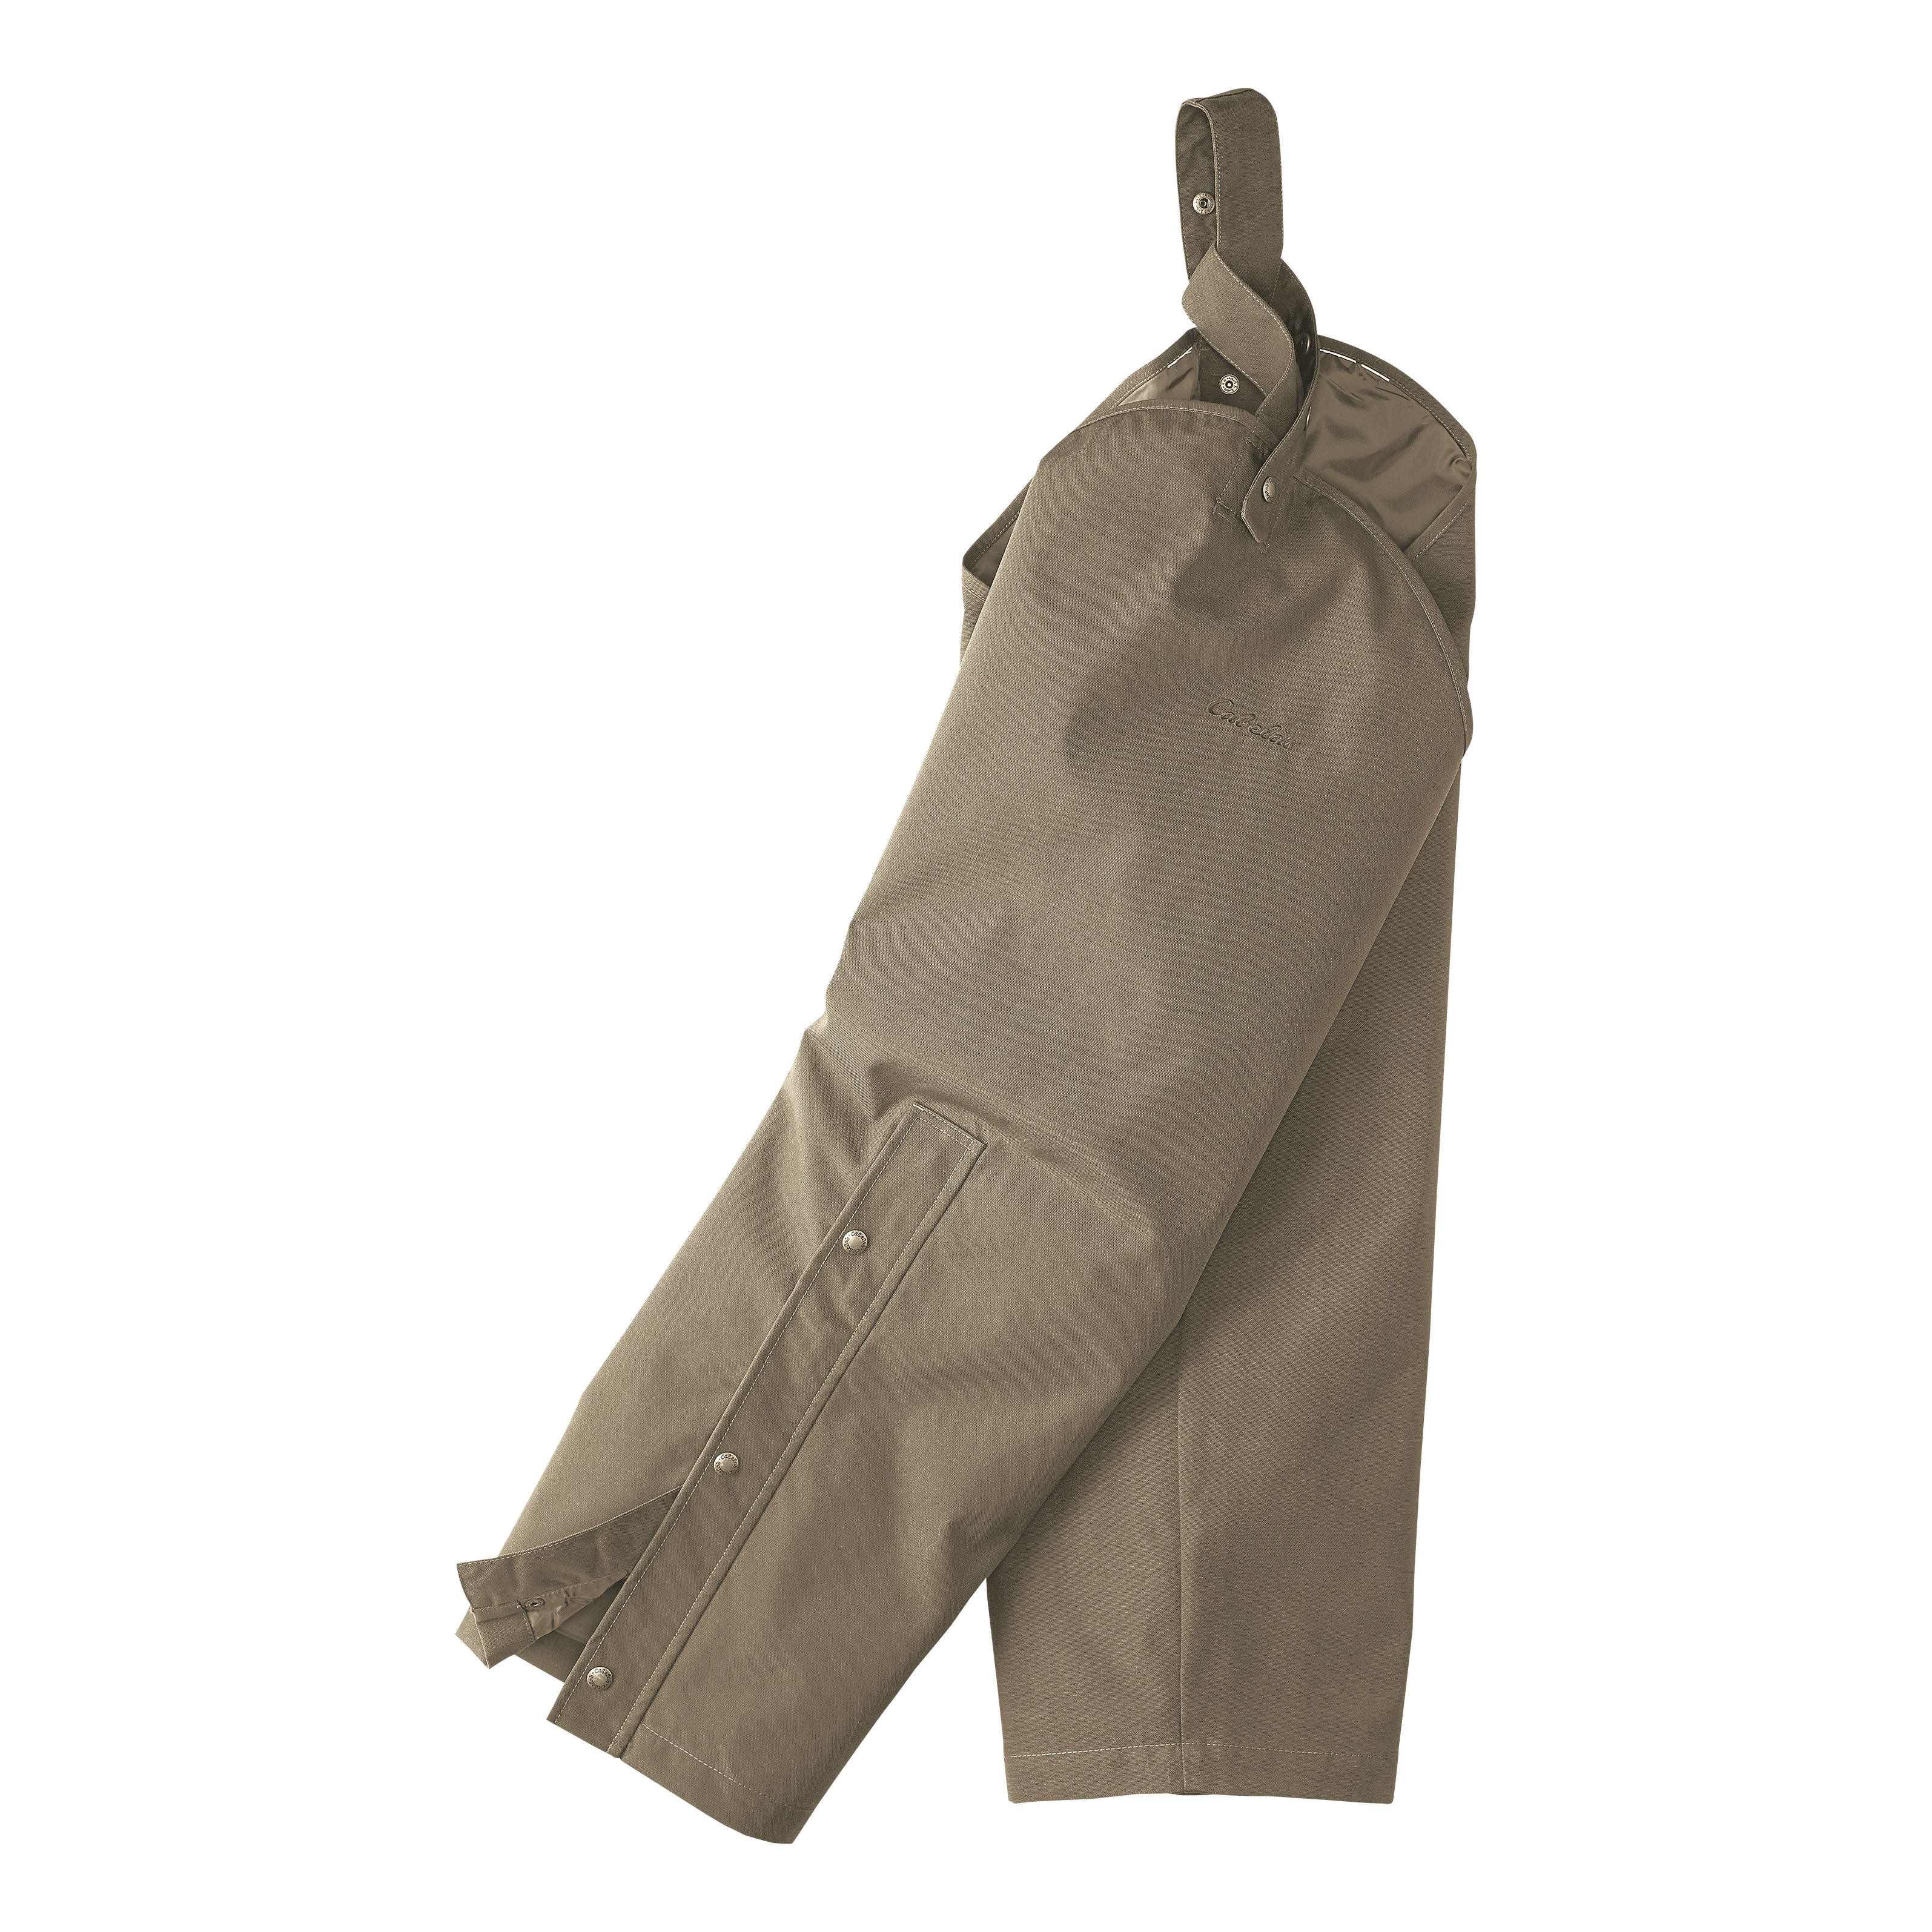 Cabela’s Men’s Upland Traditions Chaps